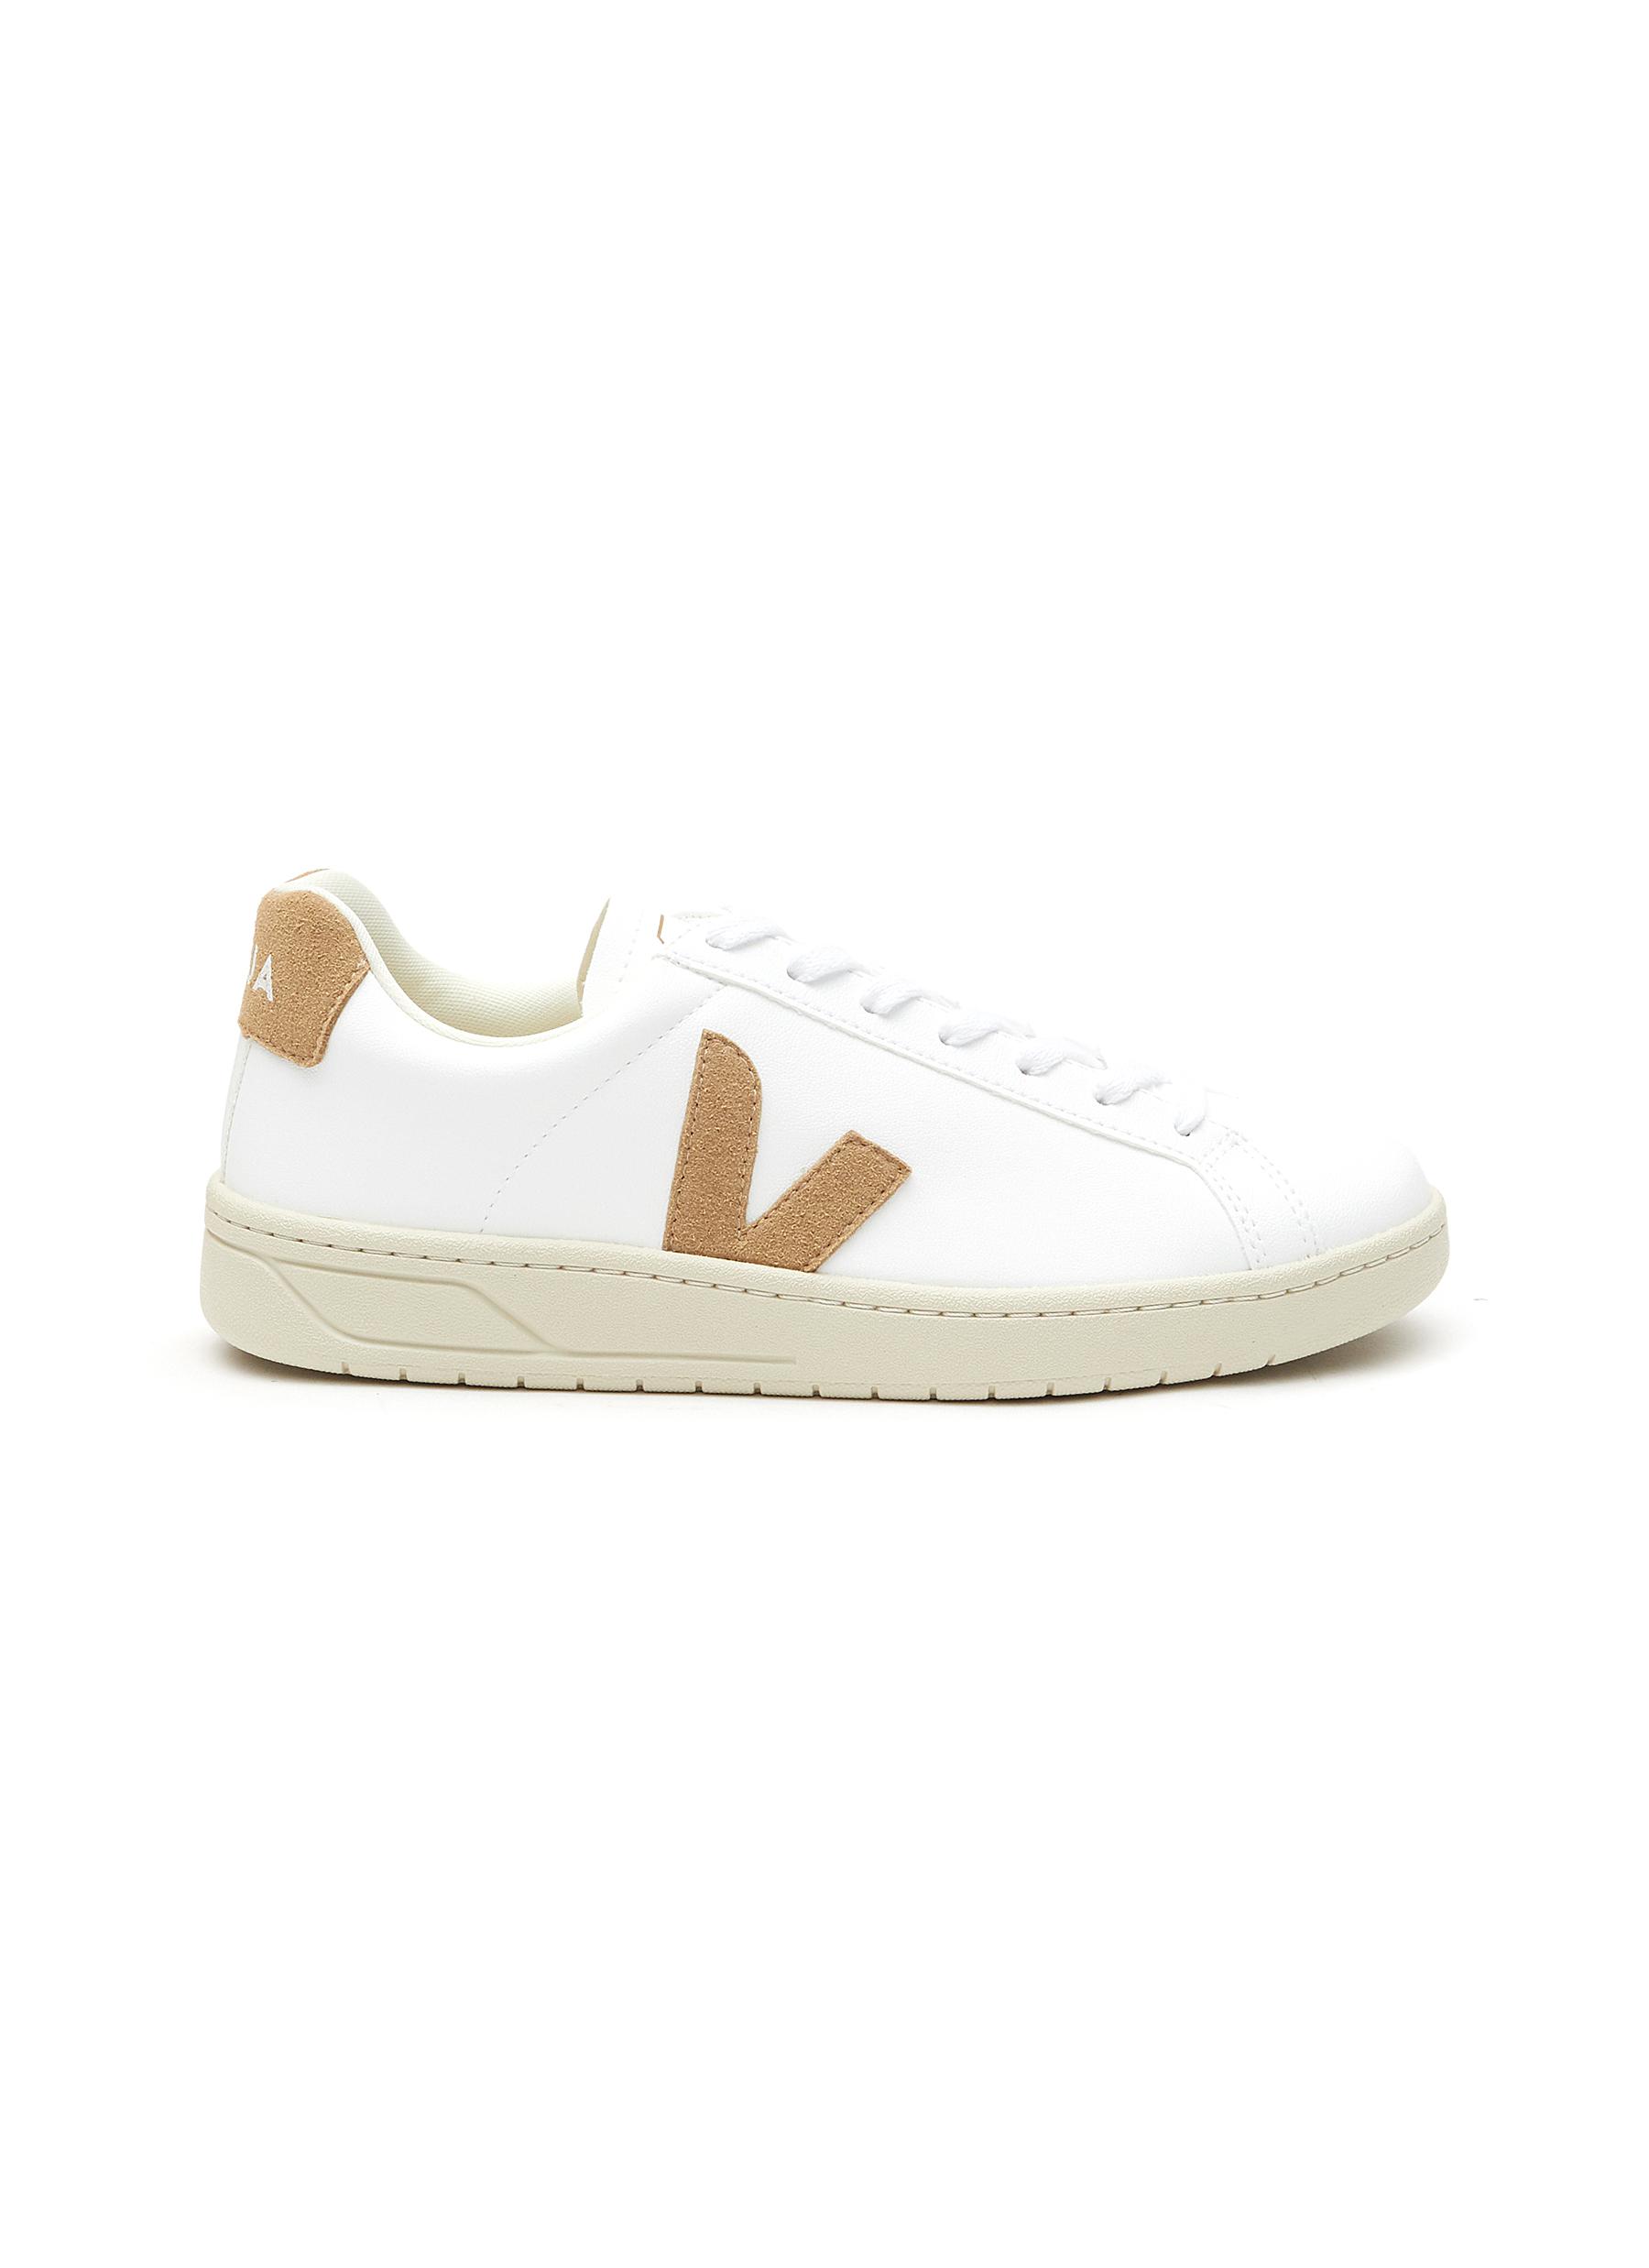 'Urca' Leather Low-Top Lace-Up Sneakers